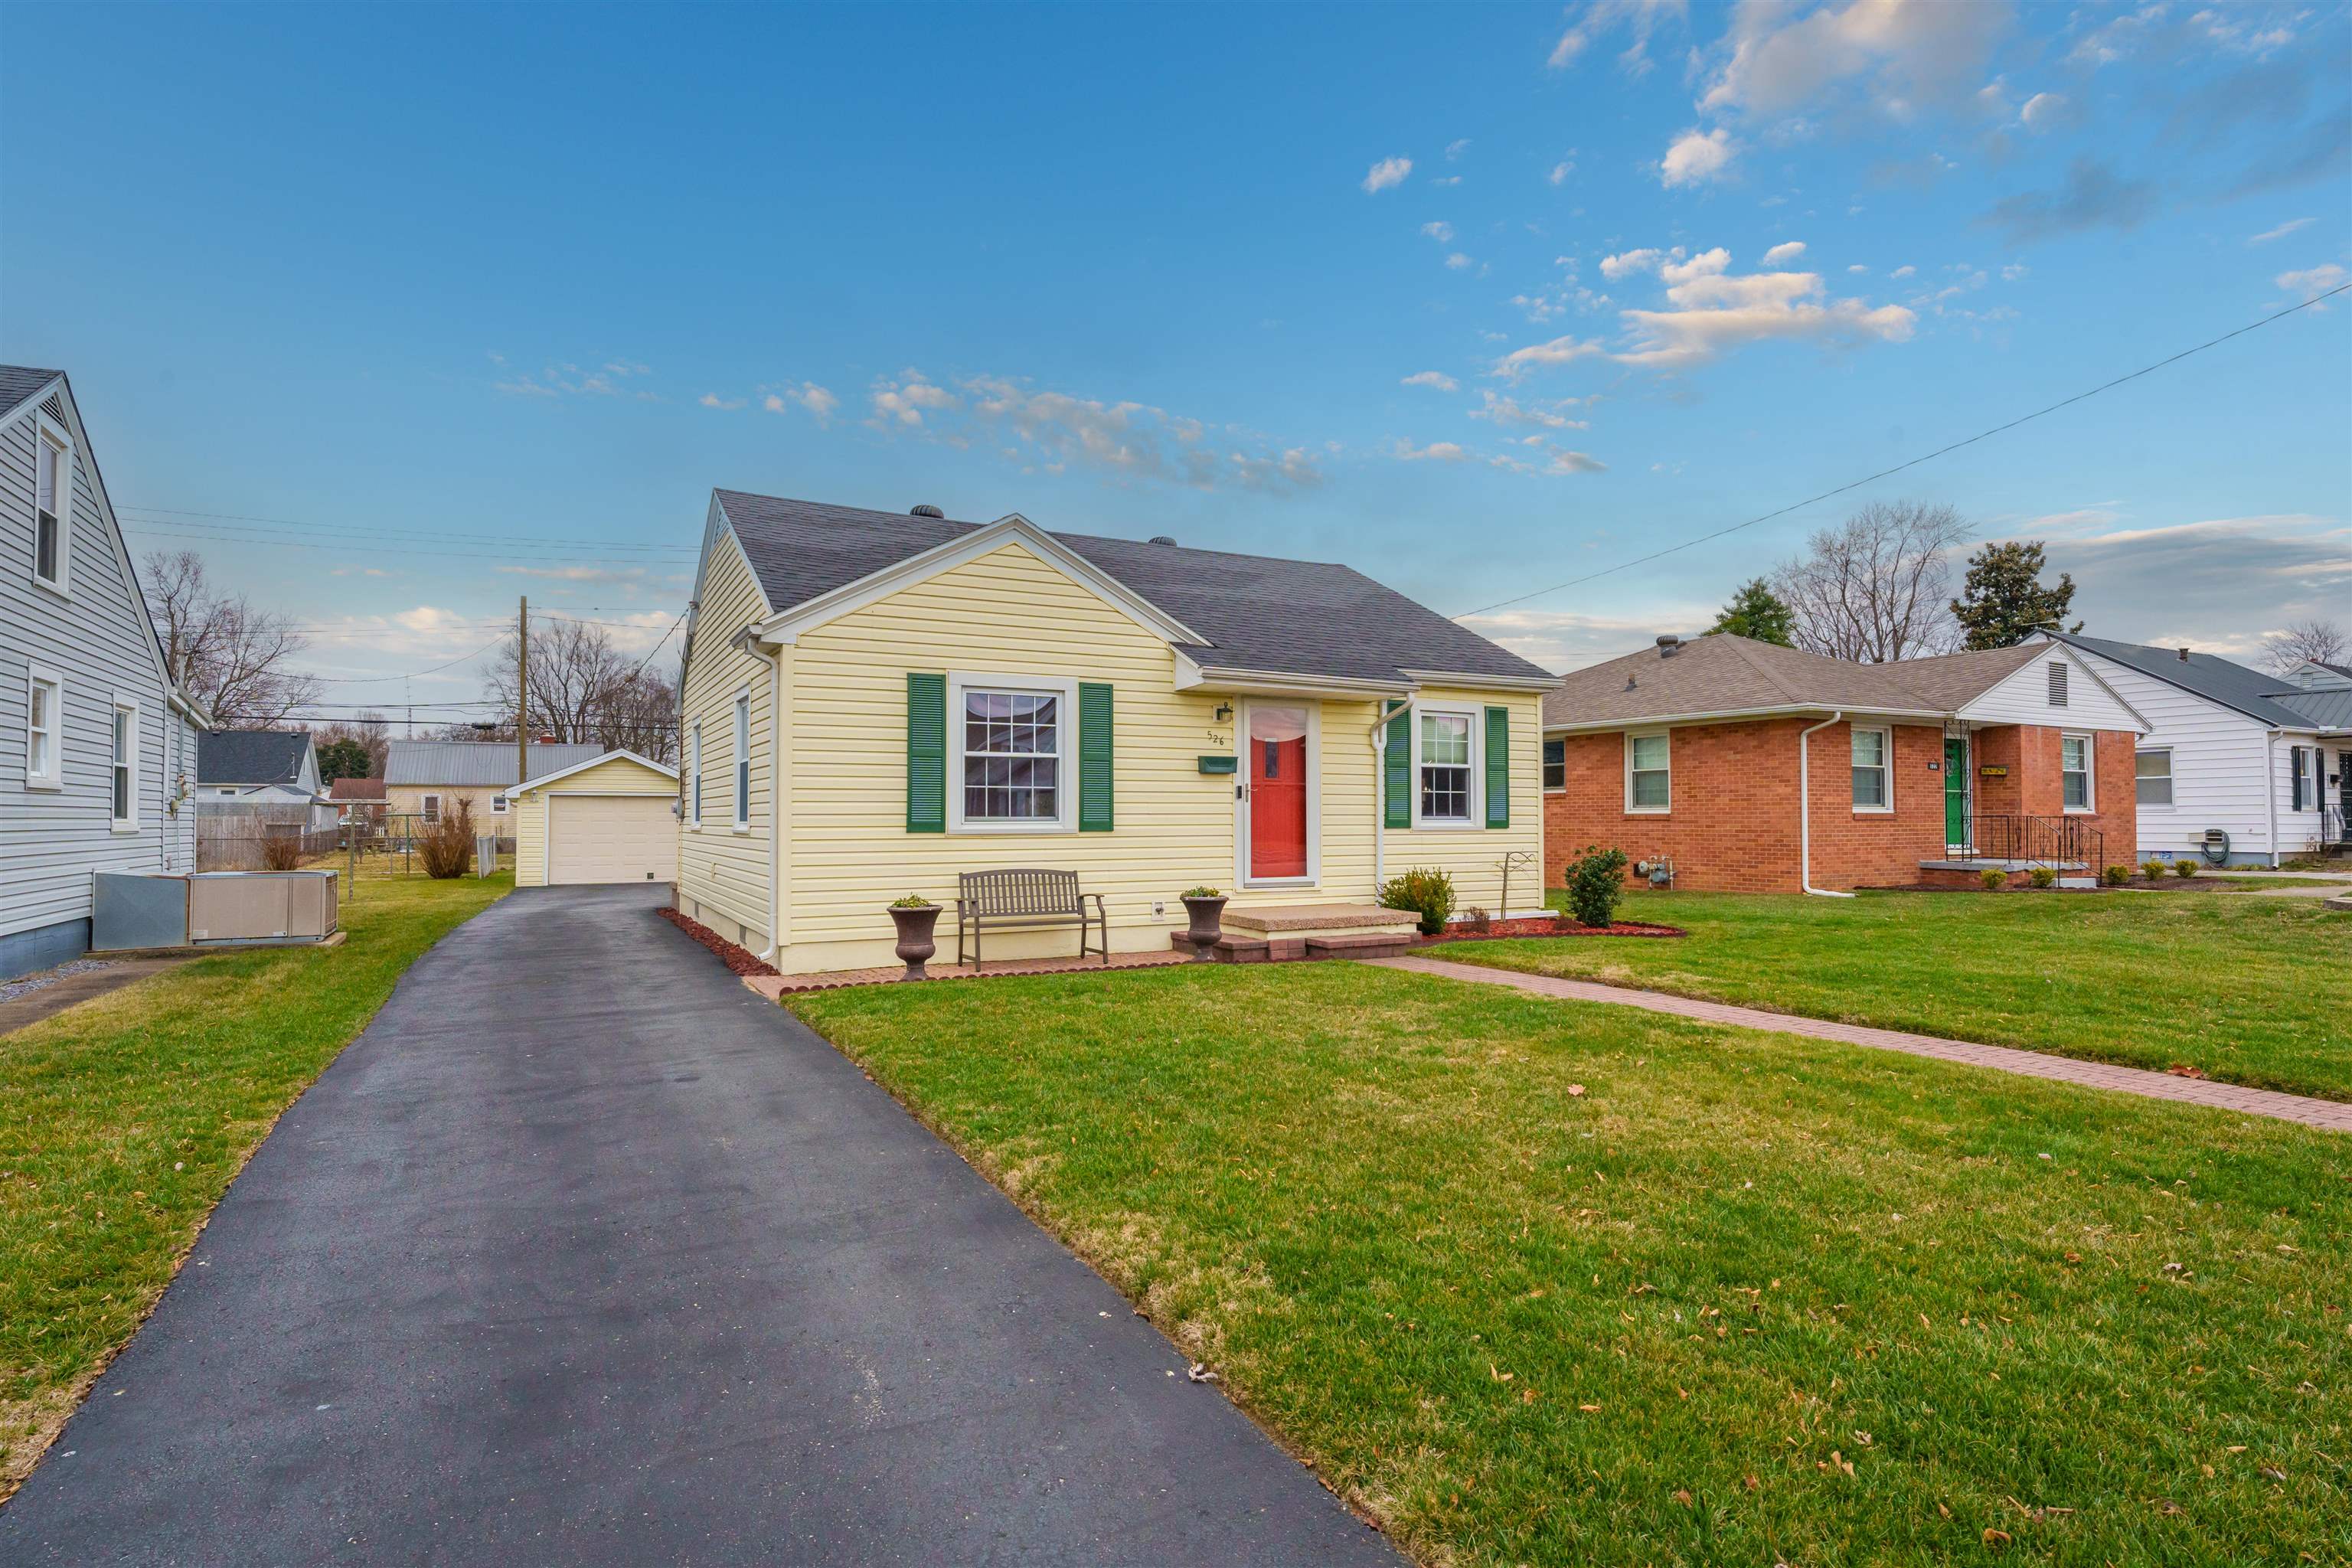 526 23rd Street, Owensboro, Kentucky 42303, 2 Bedrooms Bedrooms, ,1 BathroomBathrooms,Single Family Residence,For Sale,23rd Street,88962